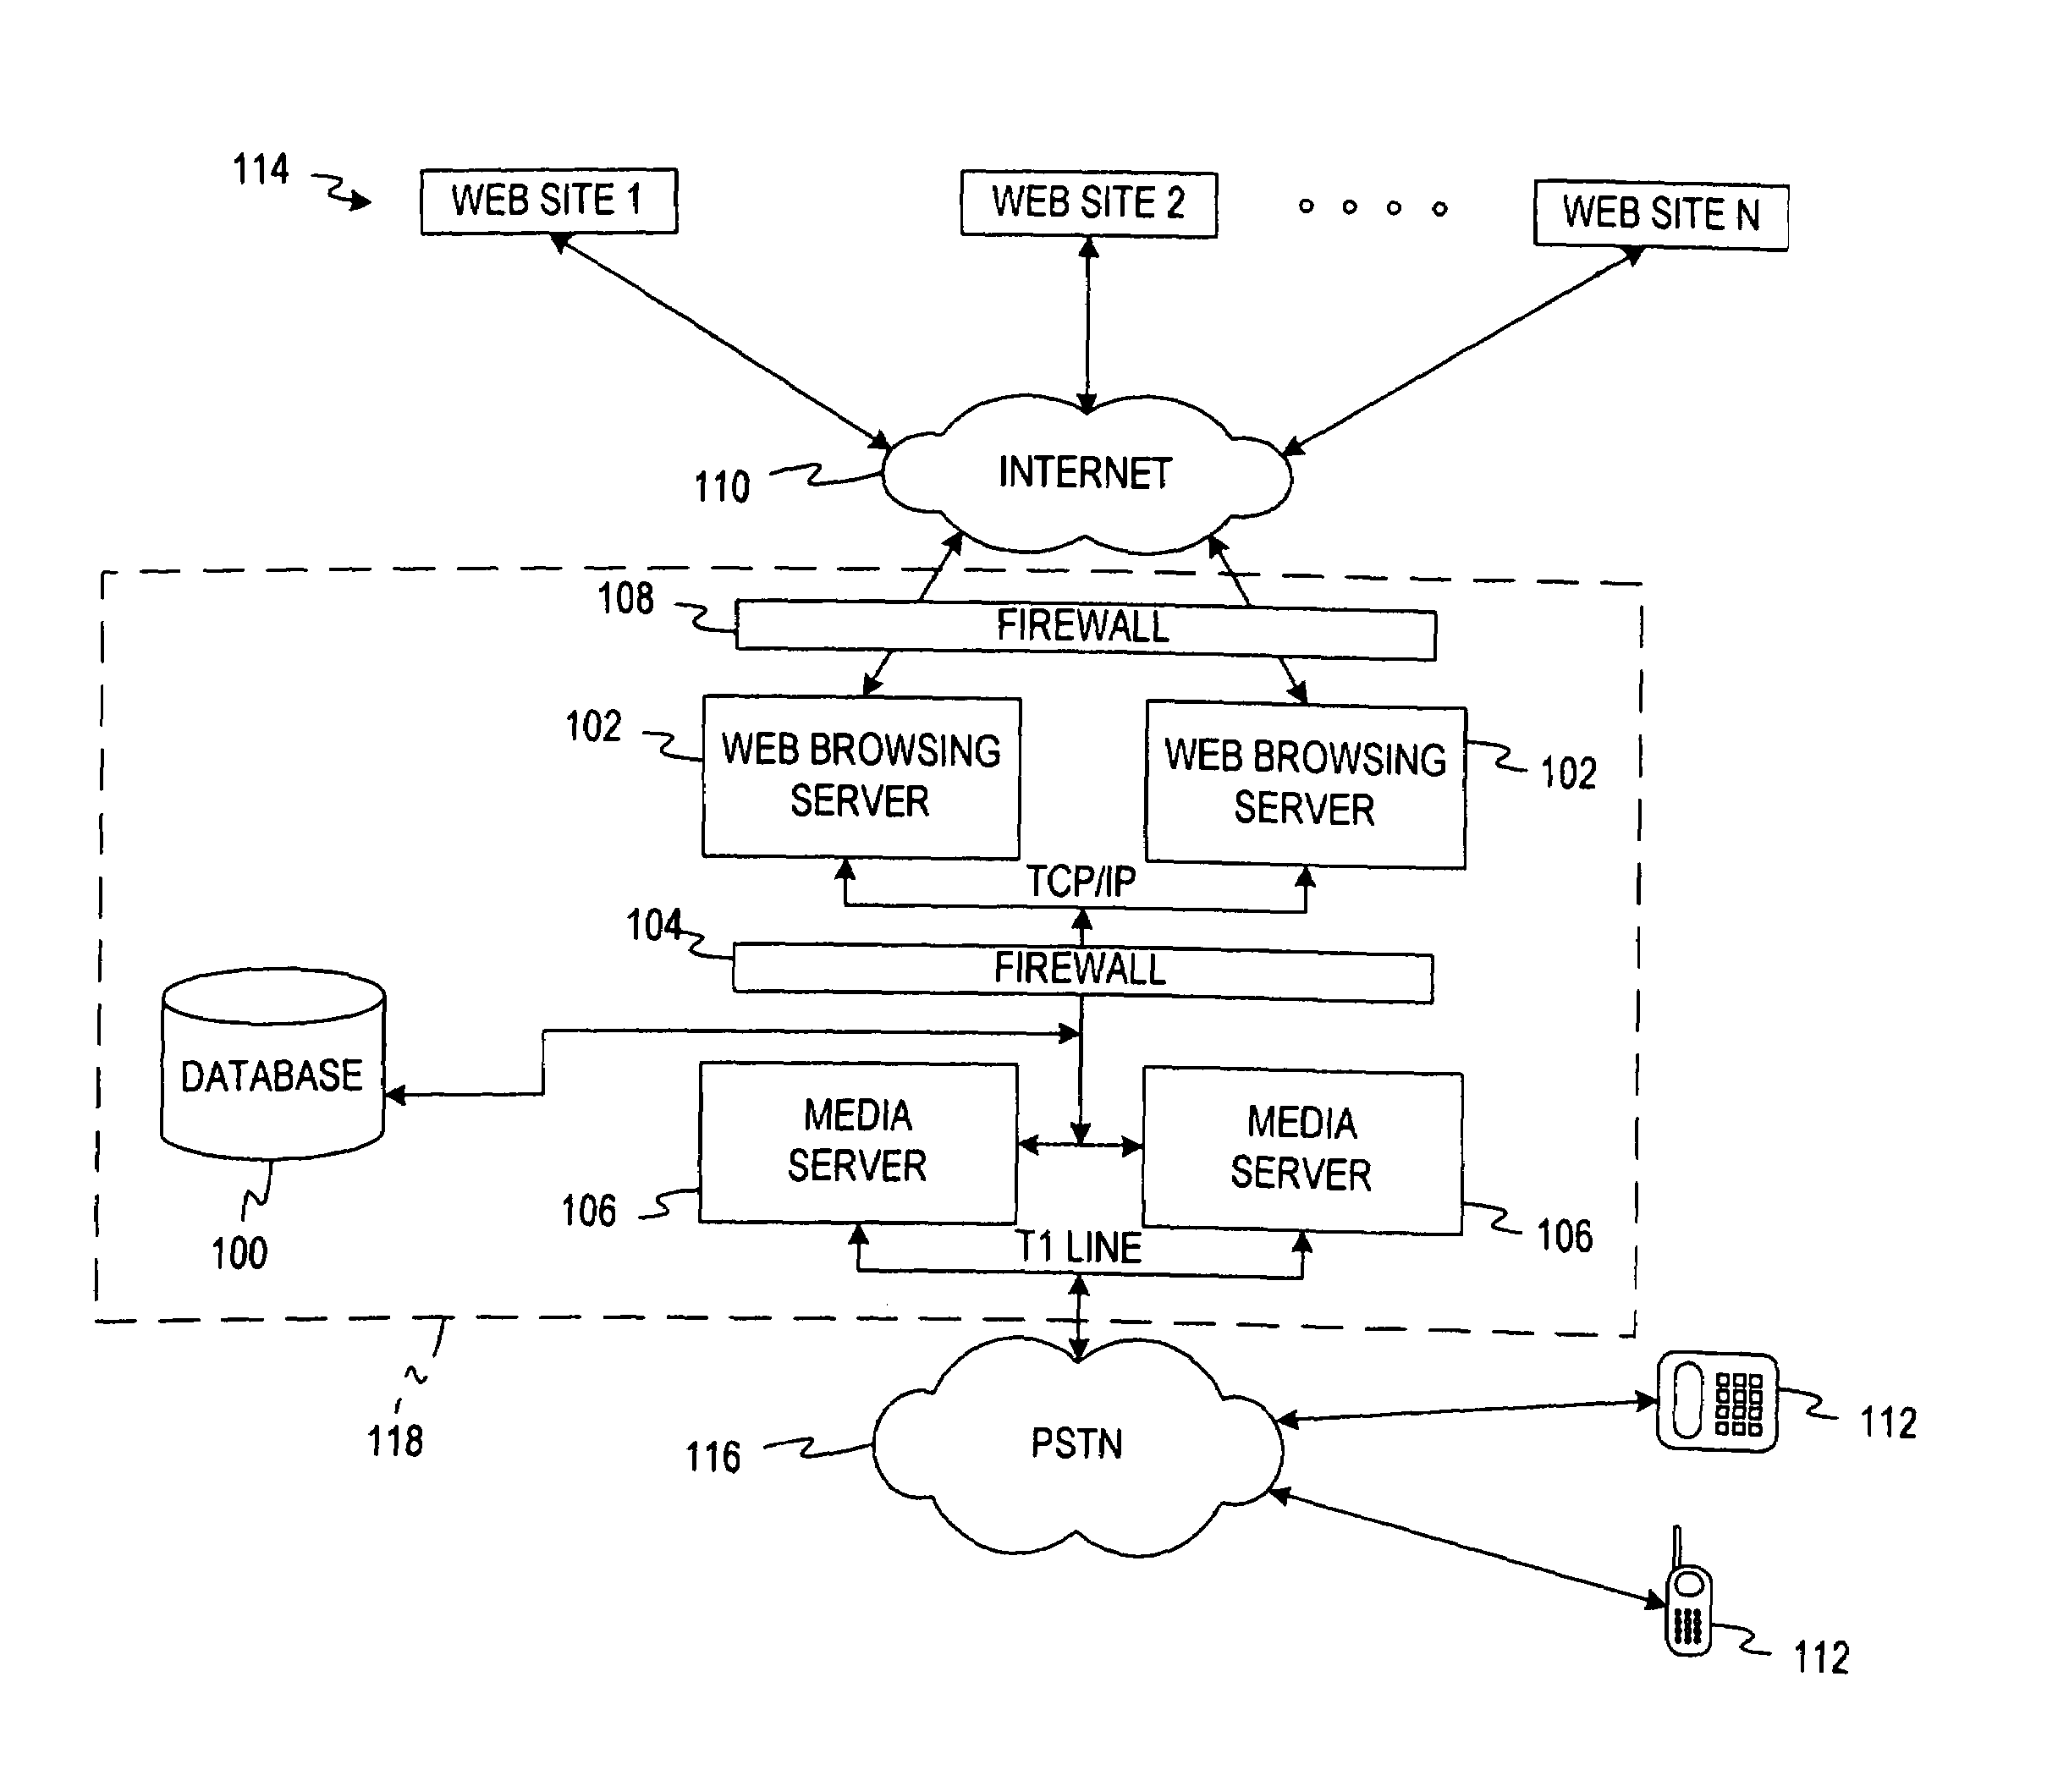 Robust voice browser system and voice activated device controller